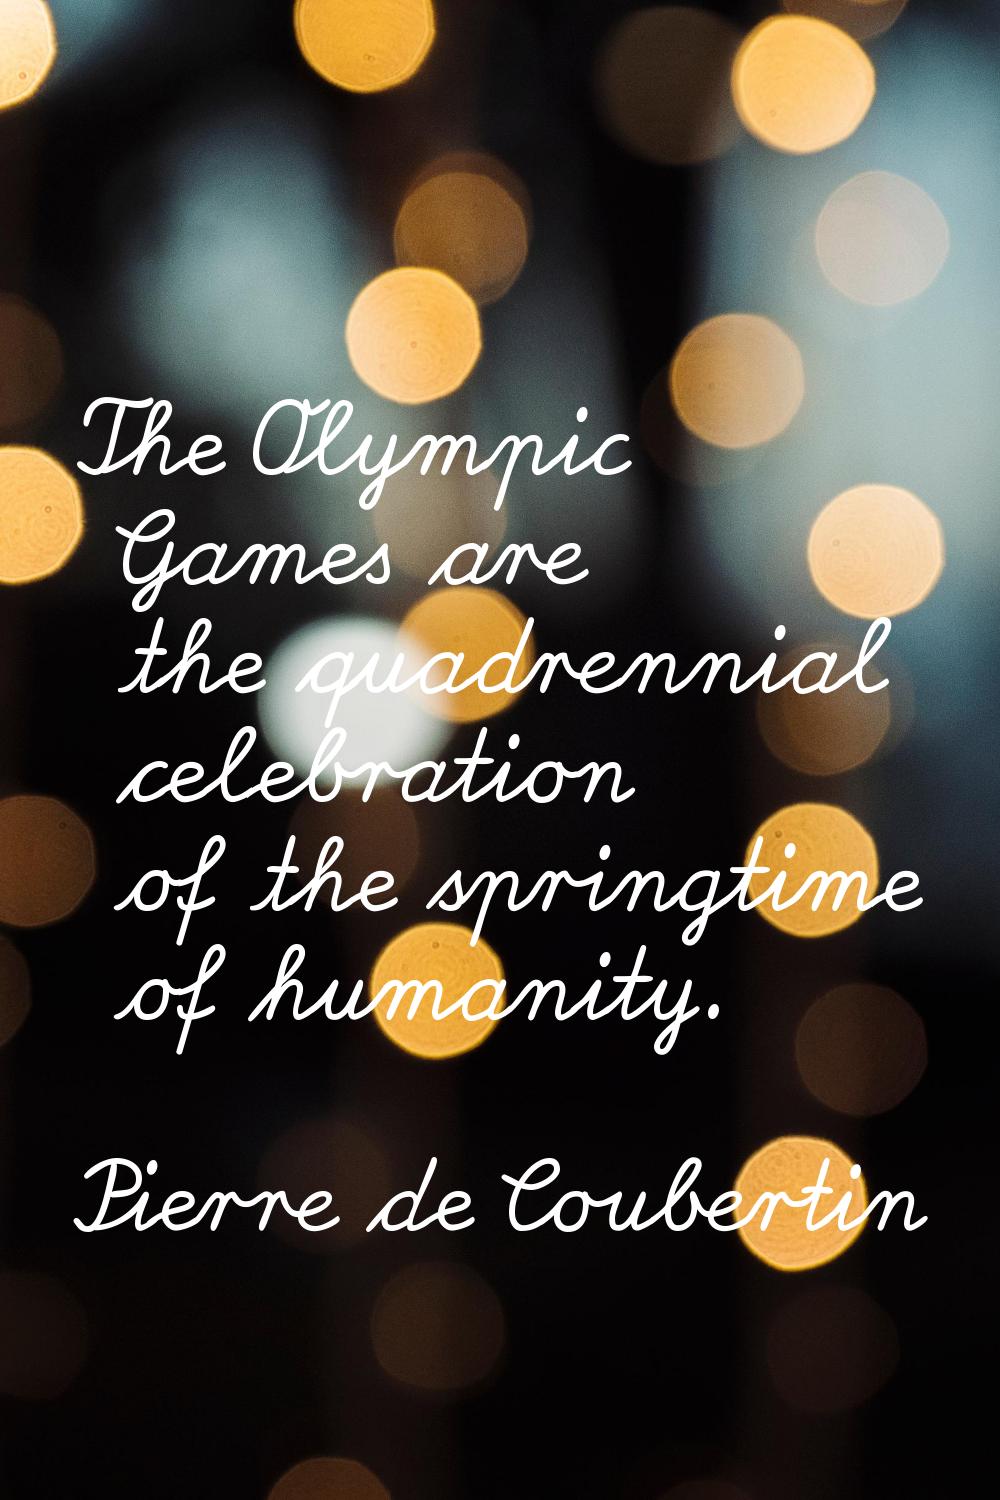 The Olympic Games are the quadrennial celebration of the springtime of humanity.